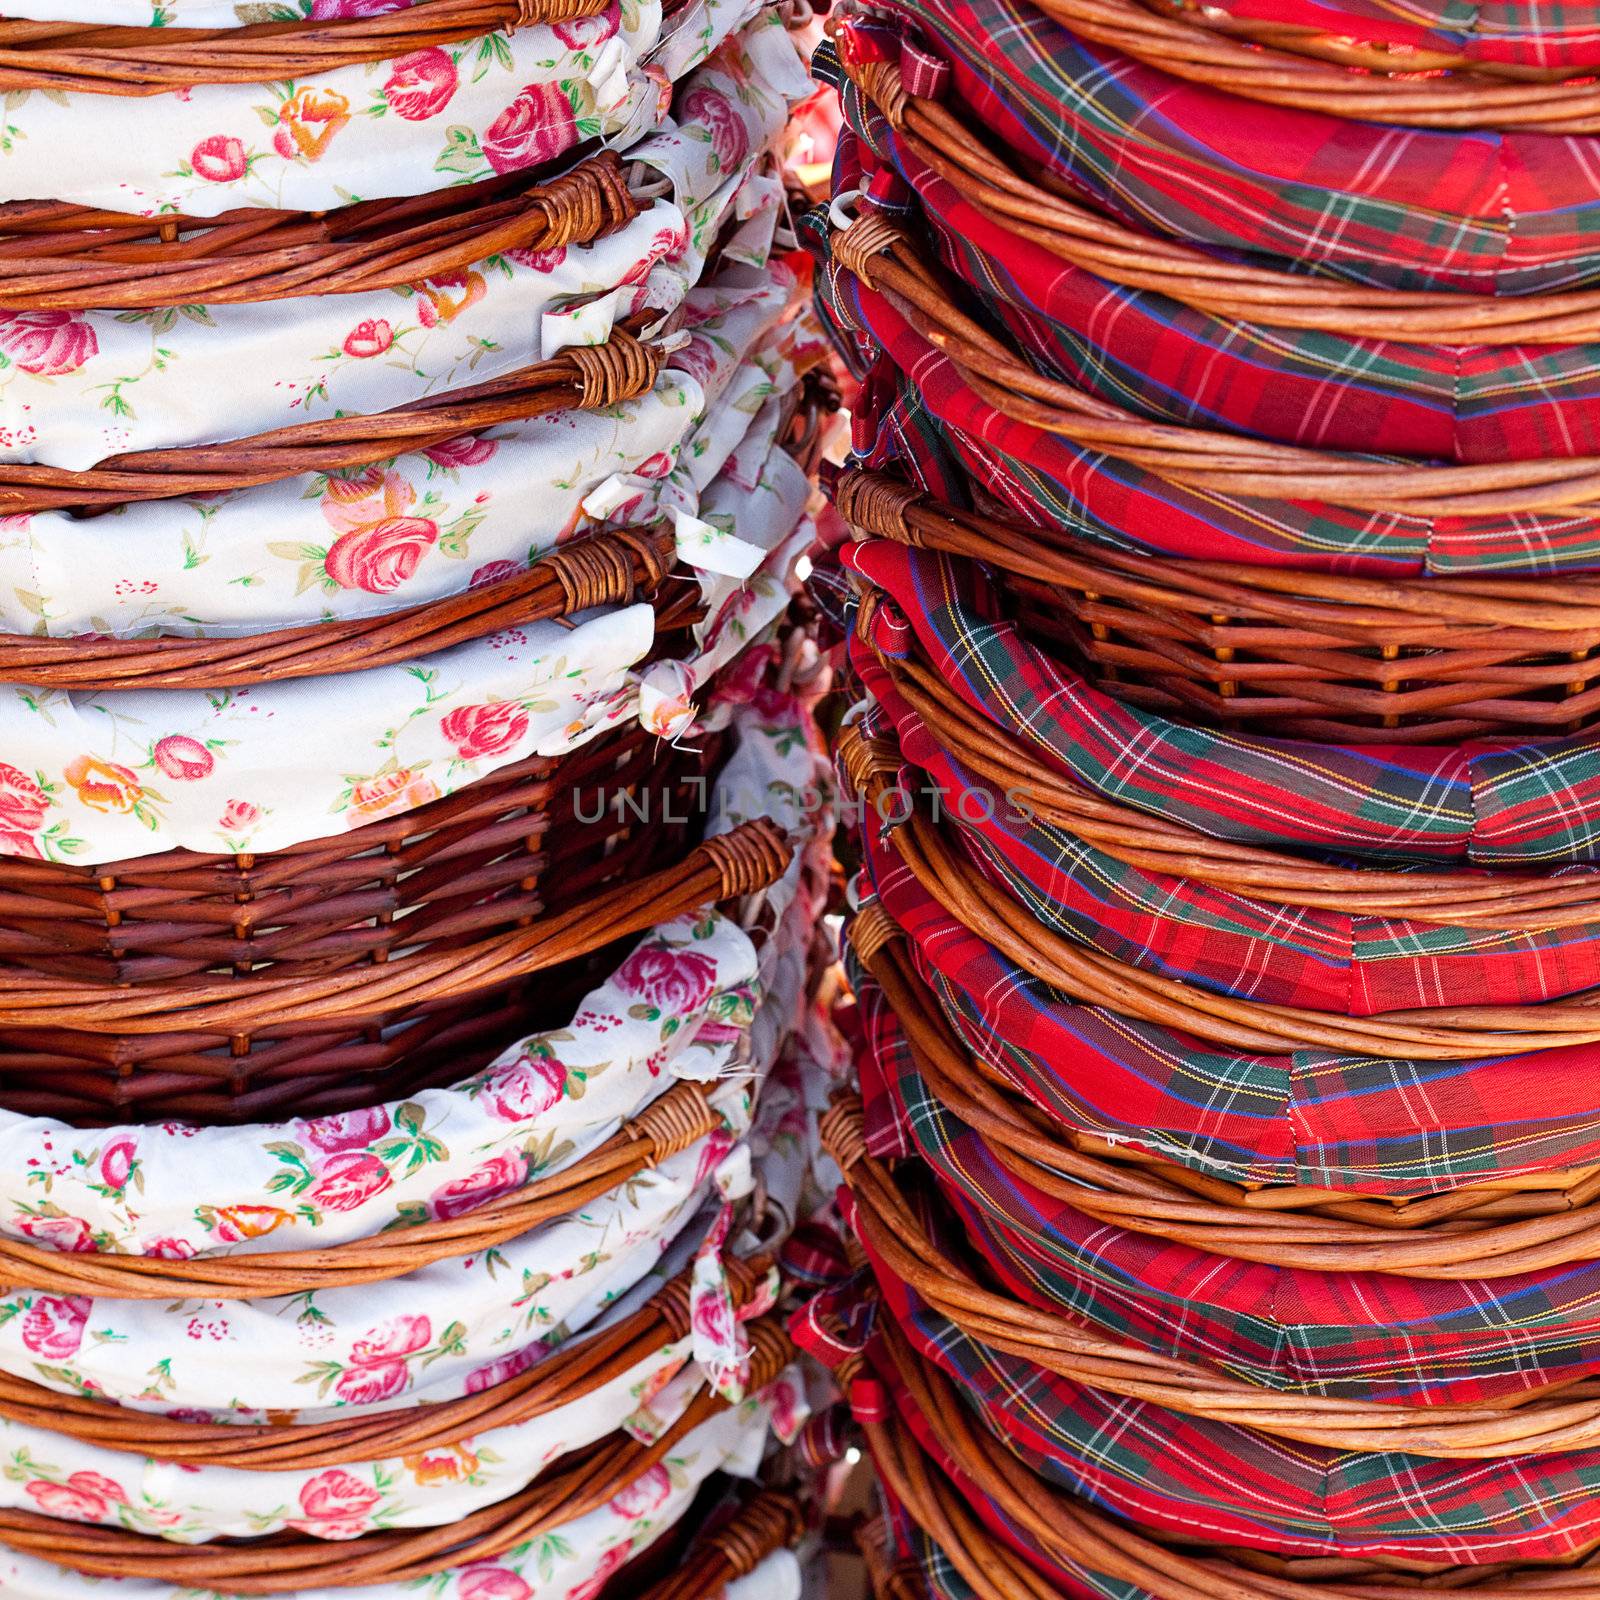 background of the baskets at the fair by jannyjus